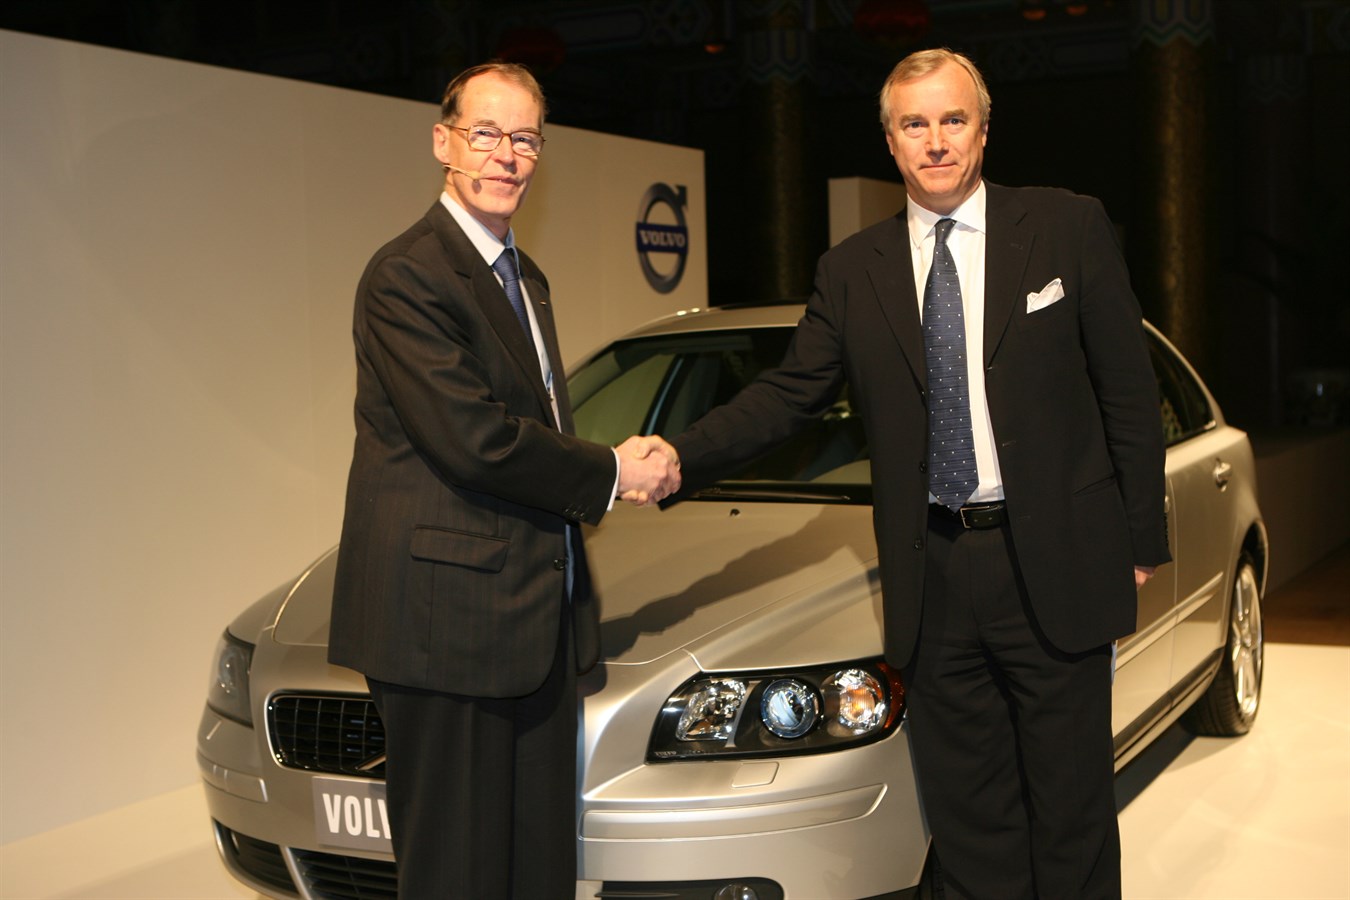 Volvo Cars starts production of the Volvo S40 in China. Fredrik Arp, President & CEO, Volvo Car Corporation and Per Norinder, General Manager, Volvo Car China.